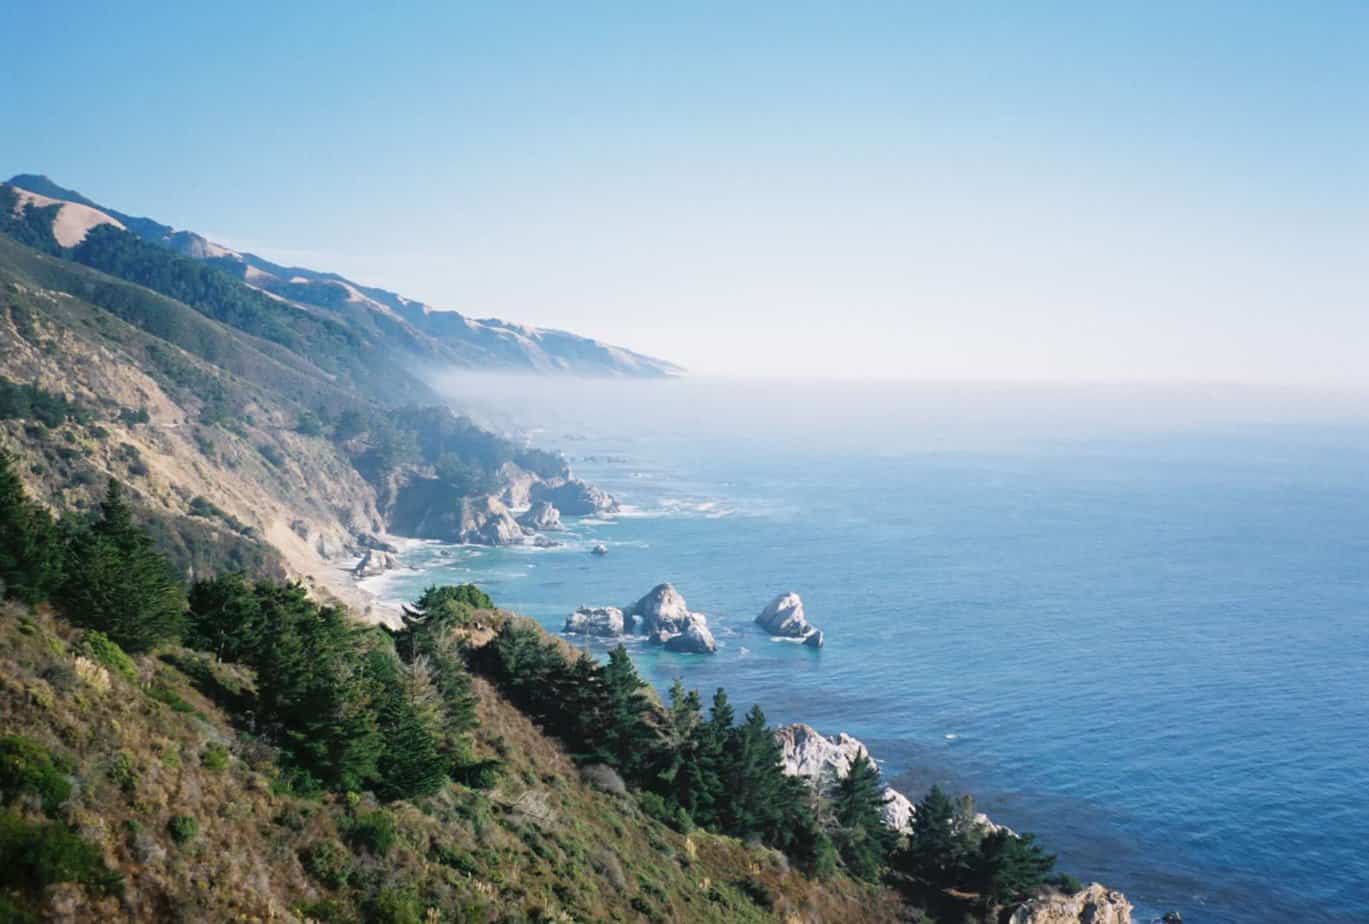 Fog drifts over the pristine shores and coves of Big Sur, California.